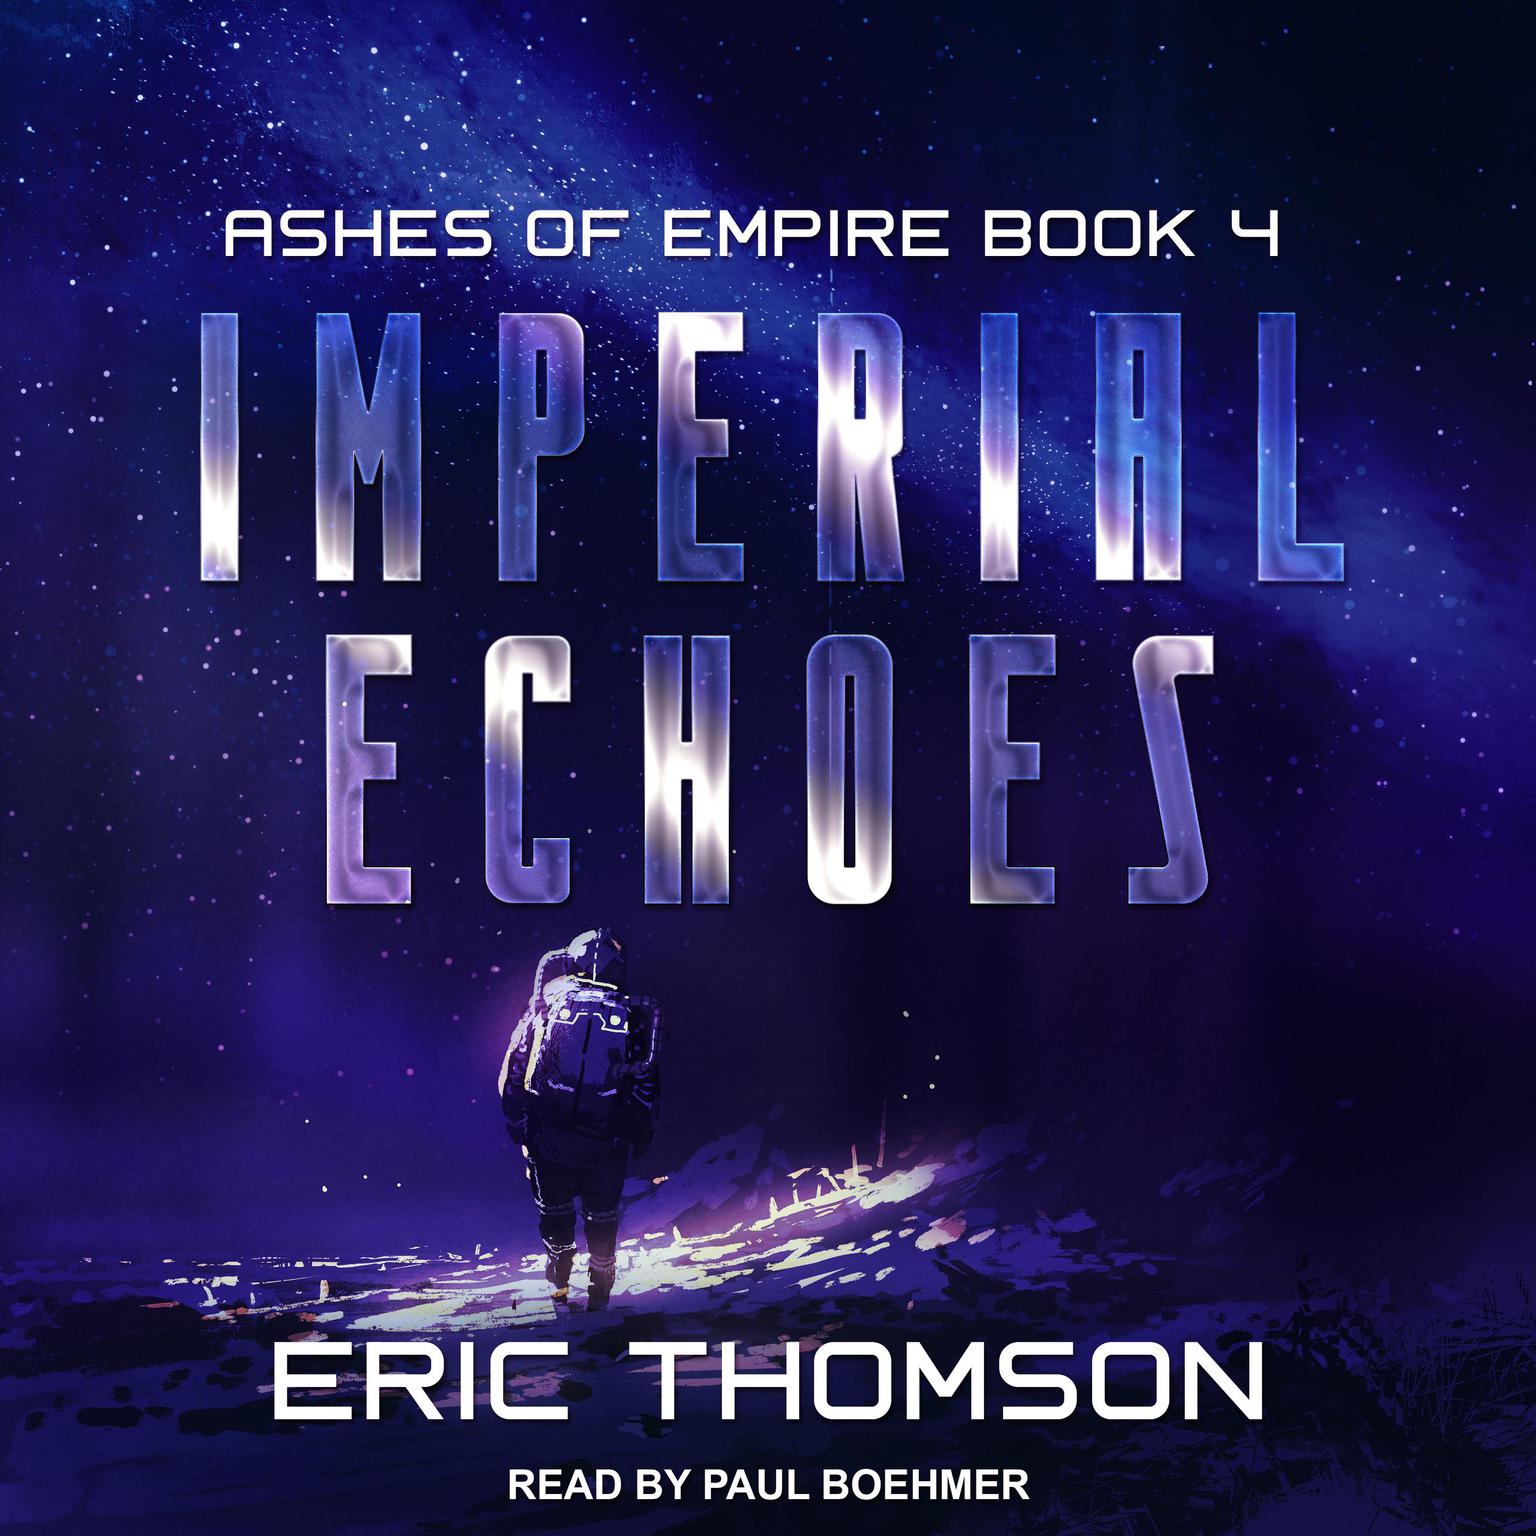 Imperial Echoes Audiobook, by Eric Thomson